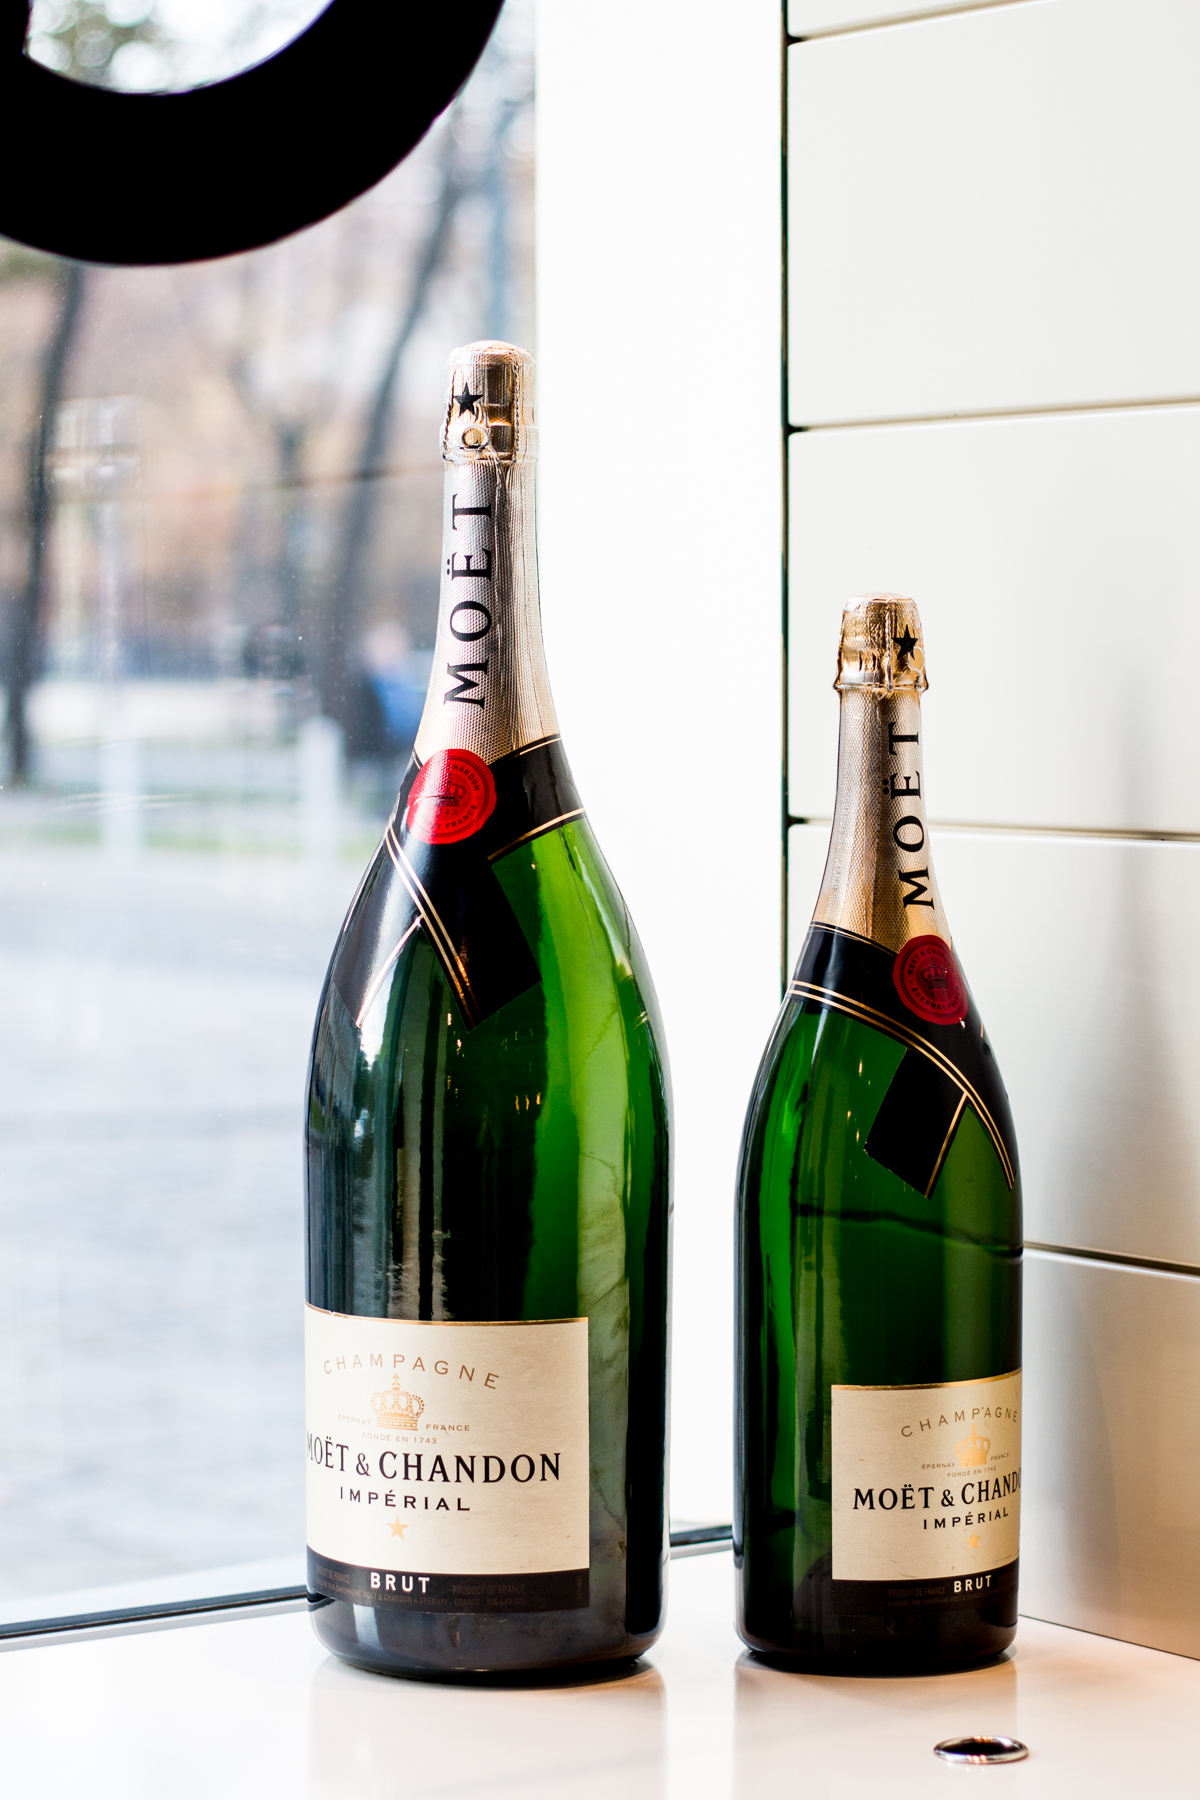 Vienna Picks: Le Moët Champagne Bar | The Daily Dose